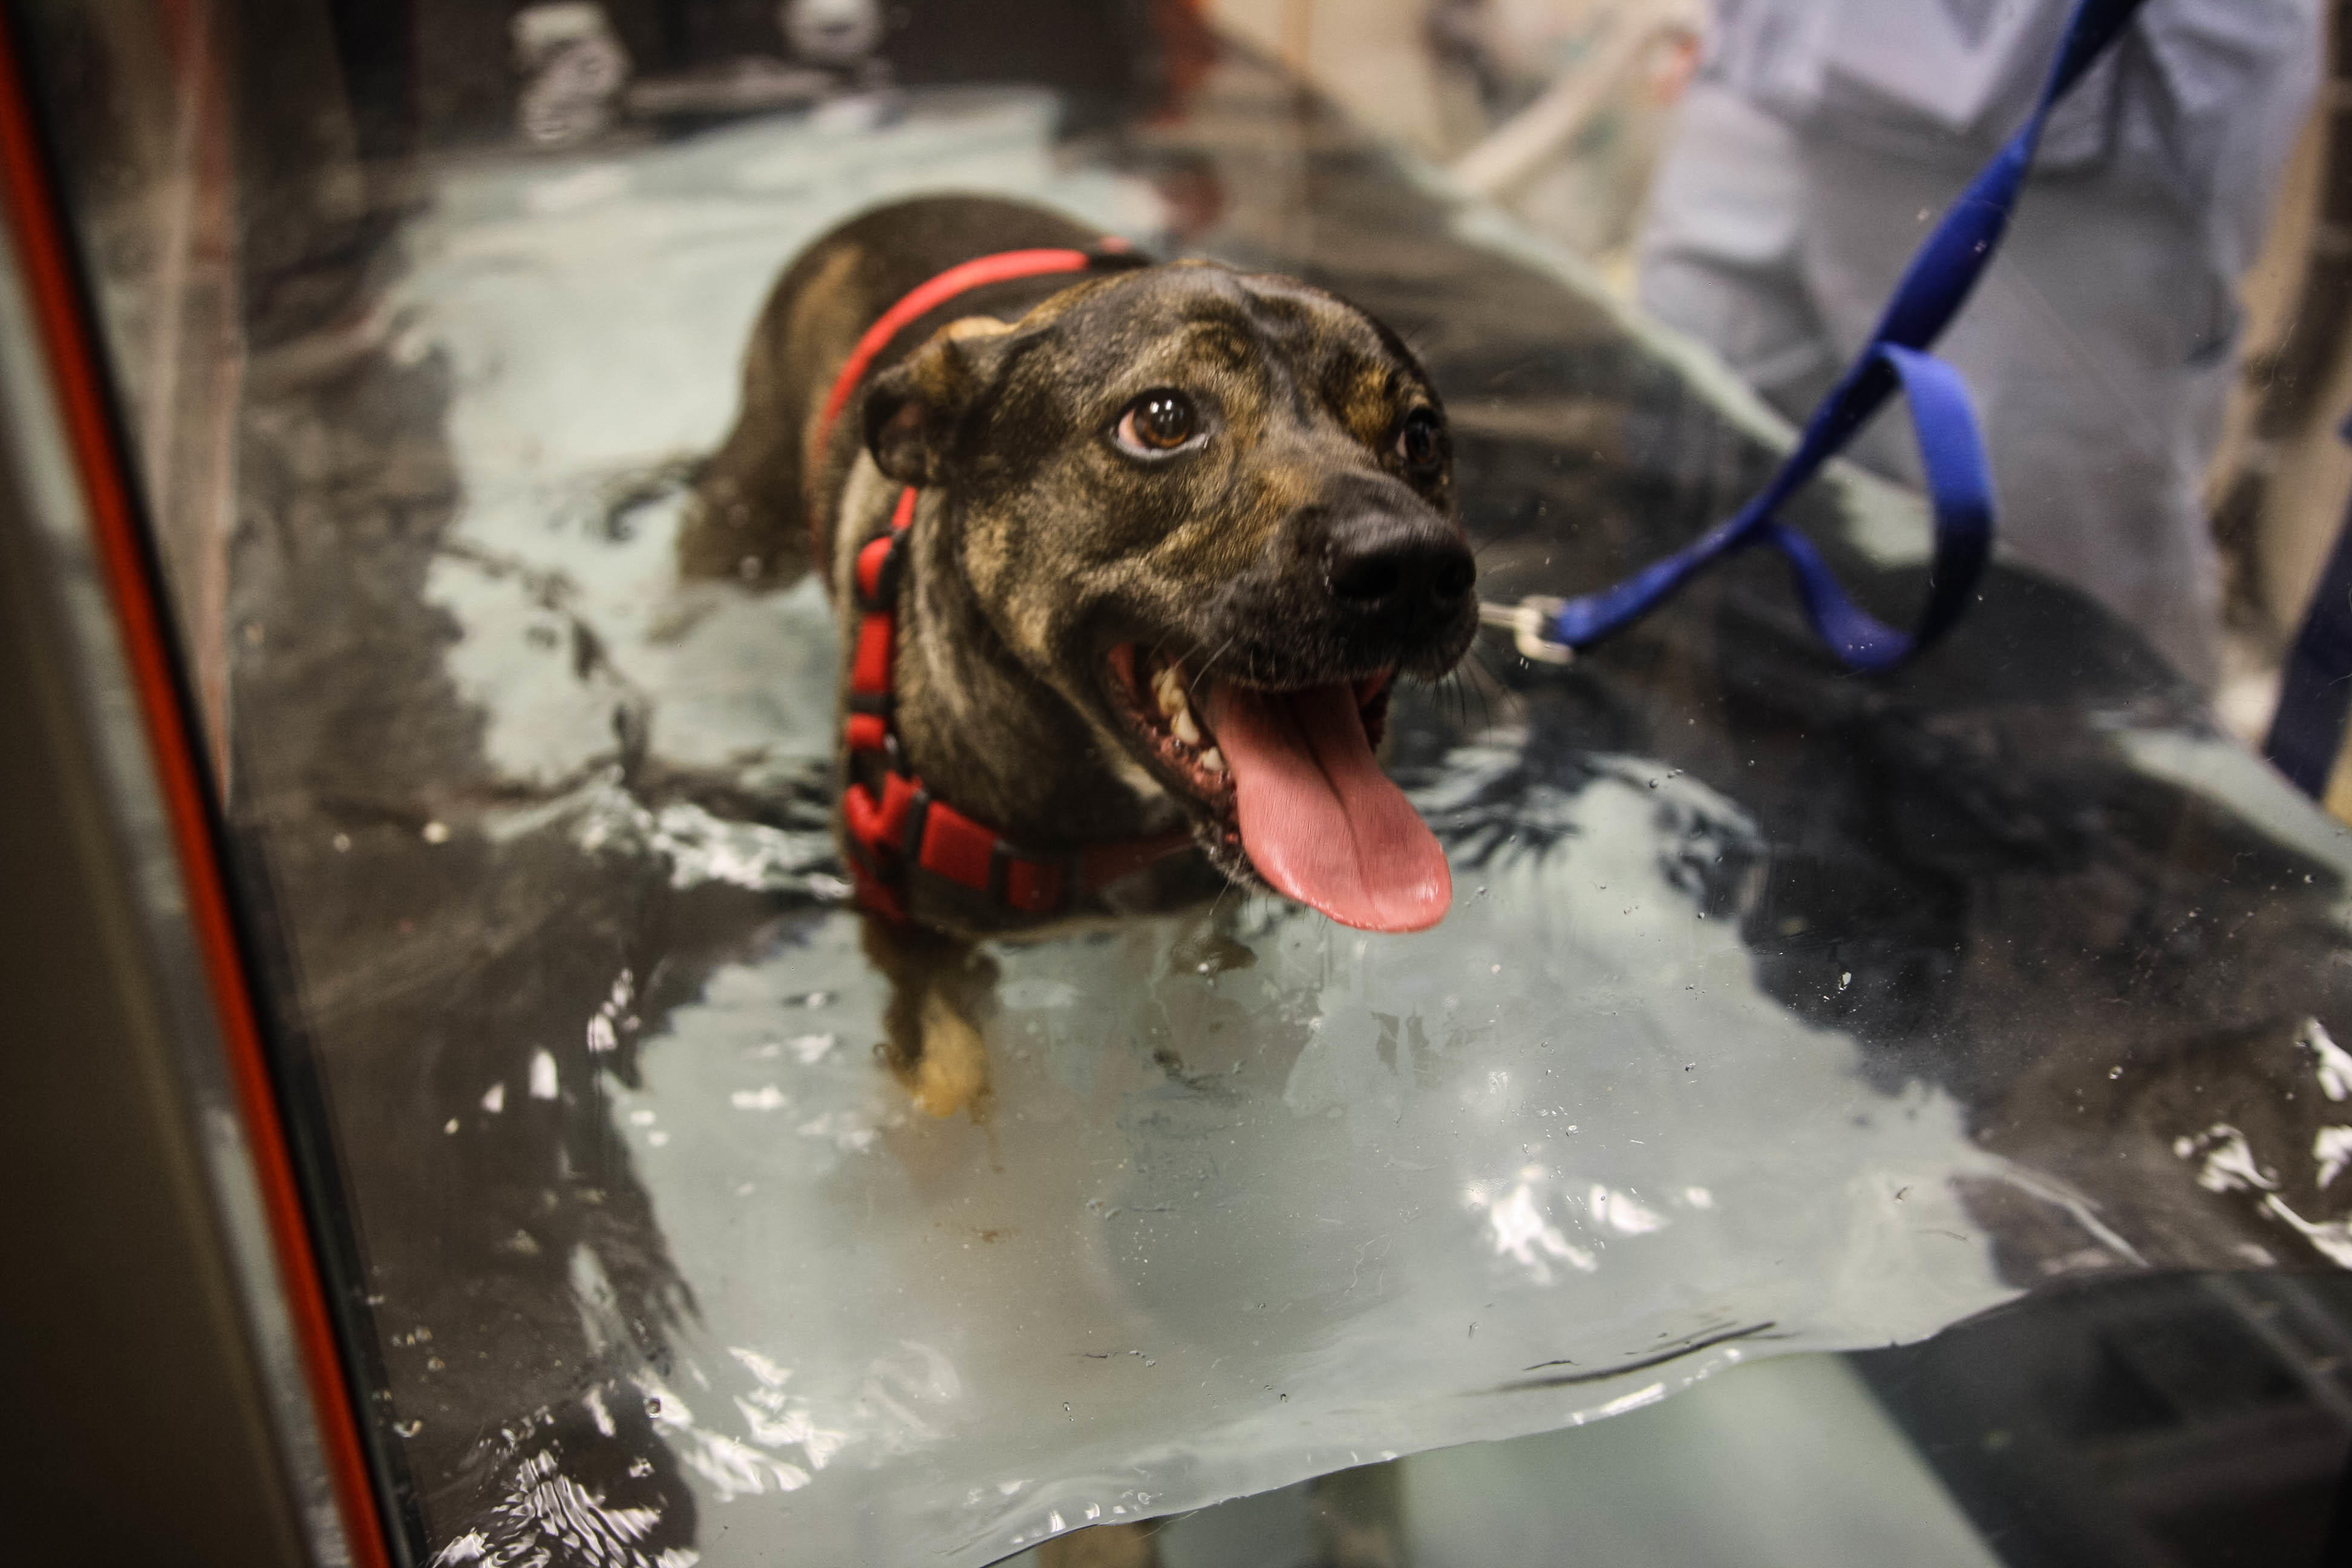 The underwater treadmill relies on the therapeutic effects to provide physical rehabilitation, weight loss, agility, exercise, and mental stimulation.